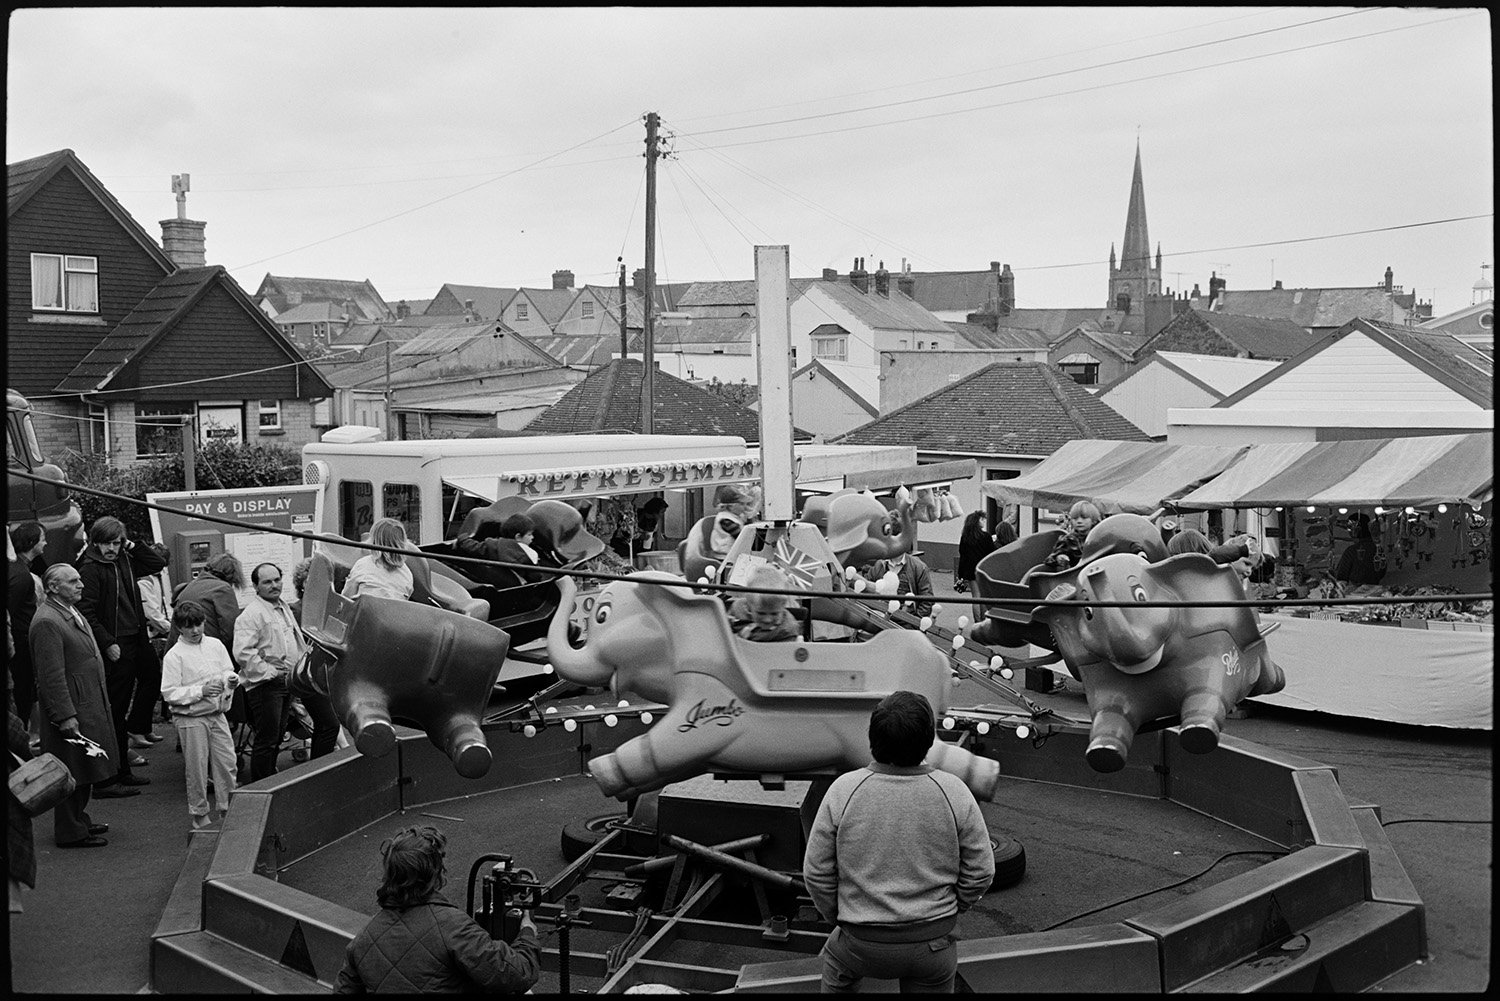 May Fair floats. Fairground procession. Generator lorry. Merry-go-round. 
[A children's merry-go-round 'Dumbo' ride at Torrington May Fair. Parents are watching children on the ride. Other stalls at the fairground, including a refreshment van, can be seen in the background.]